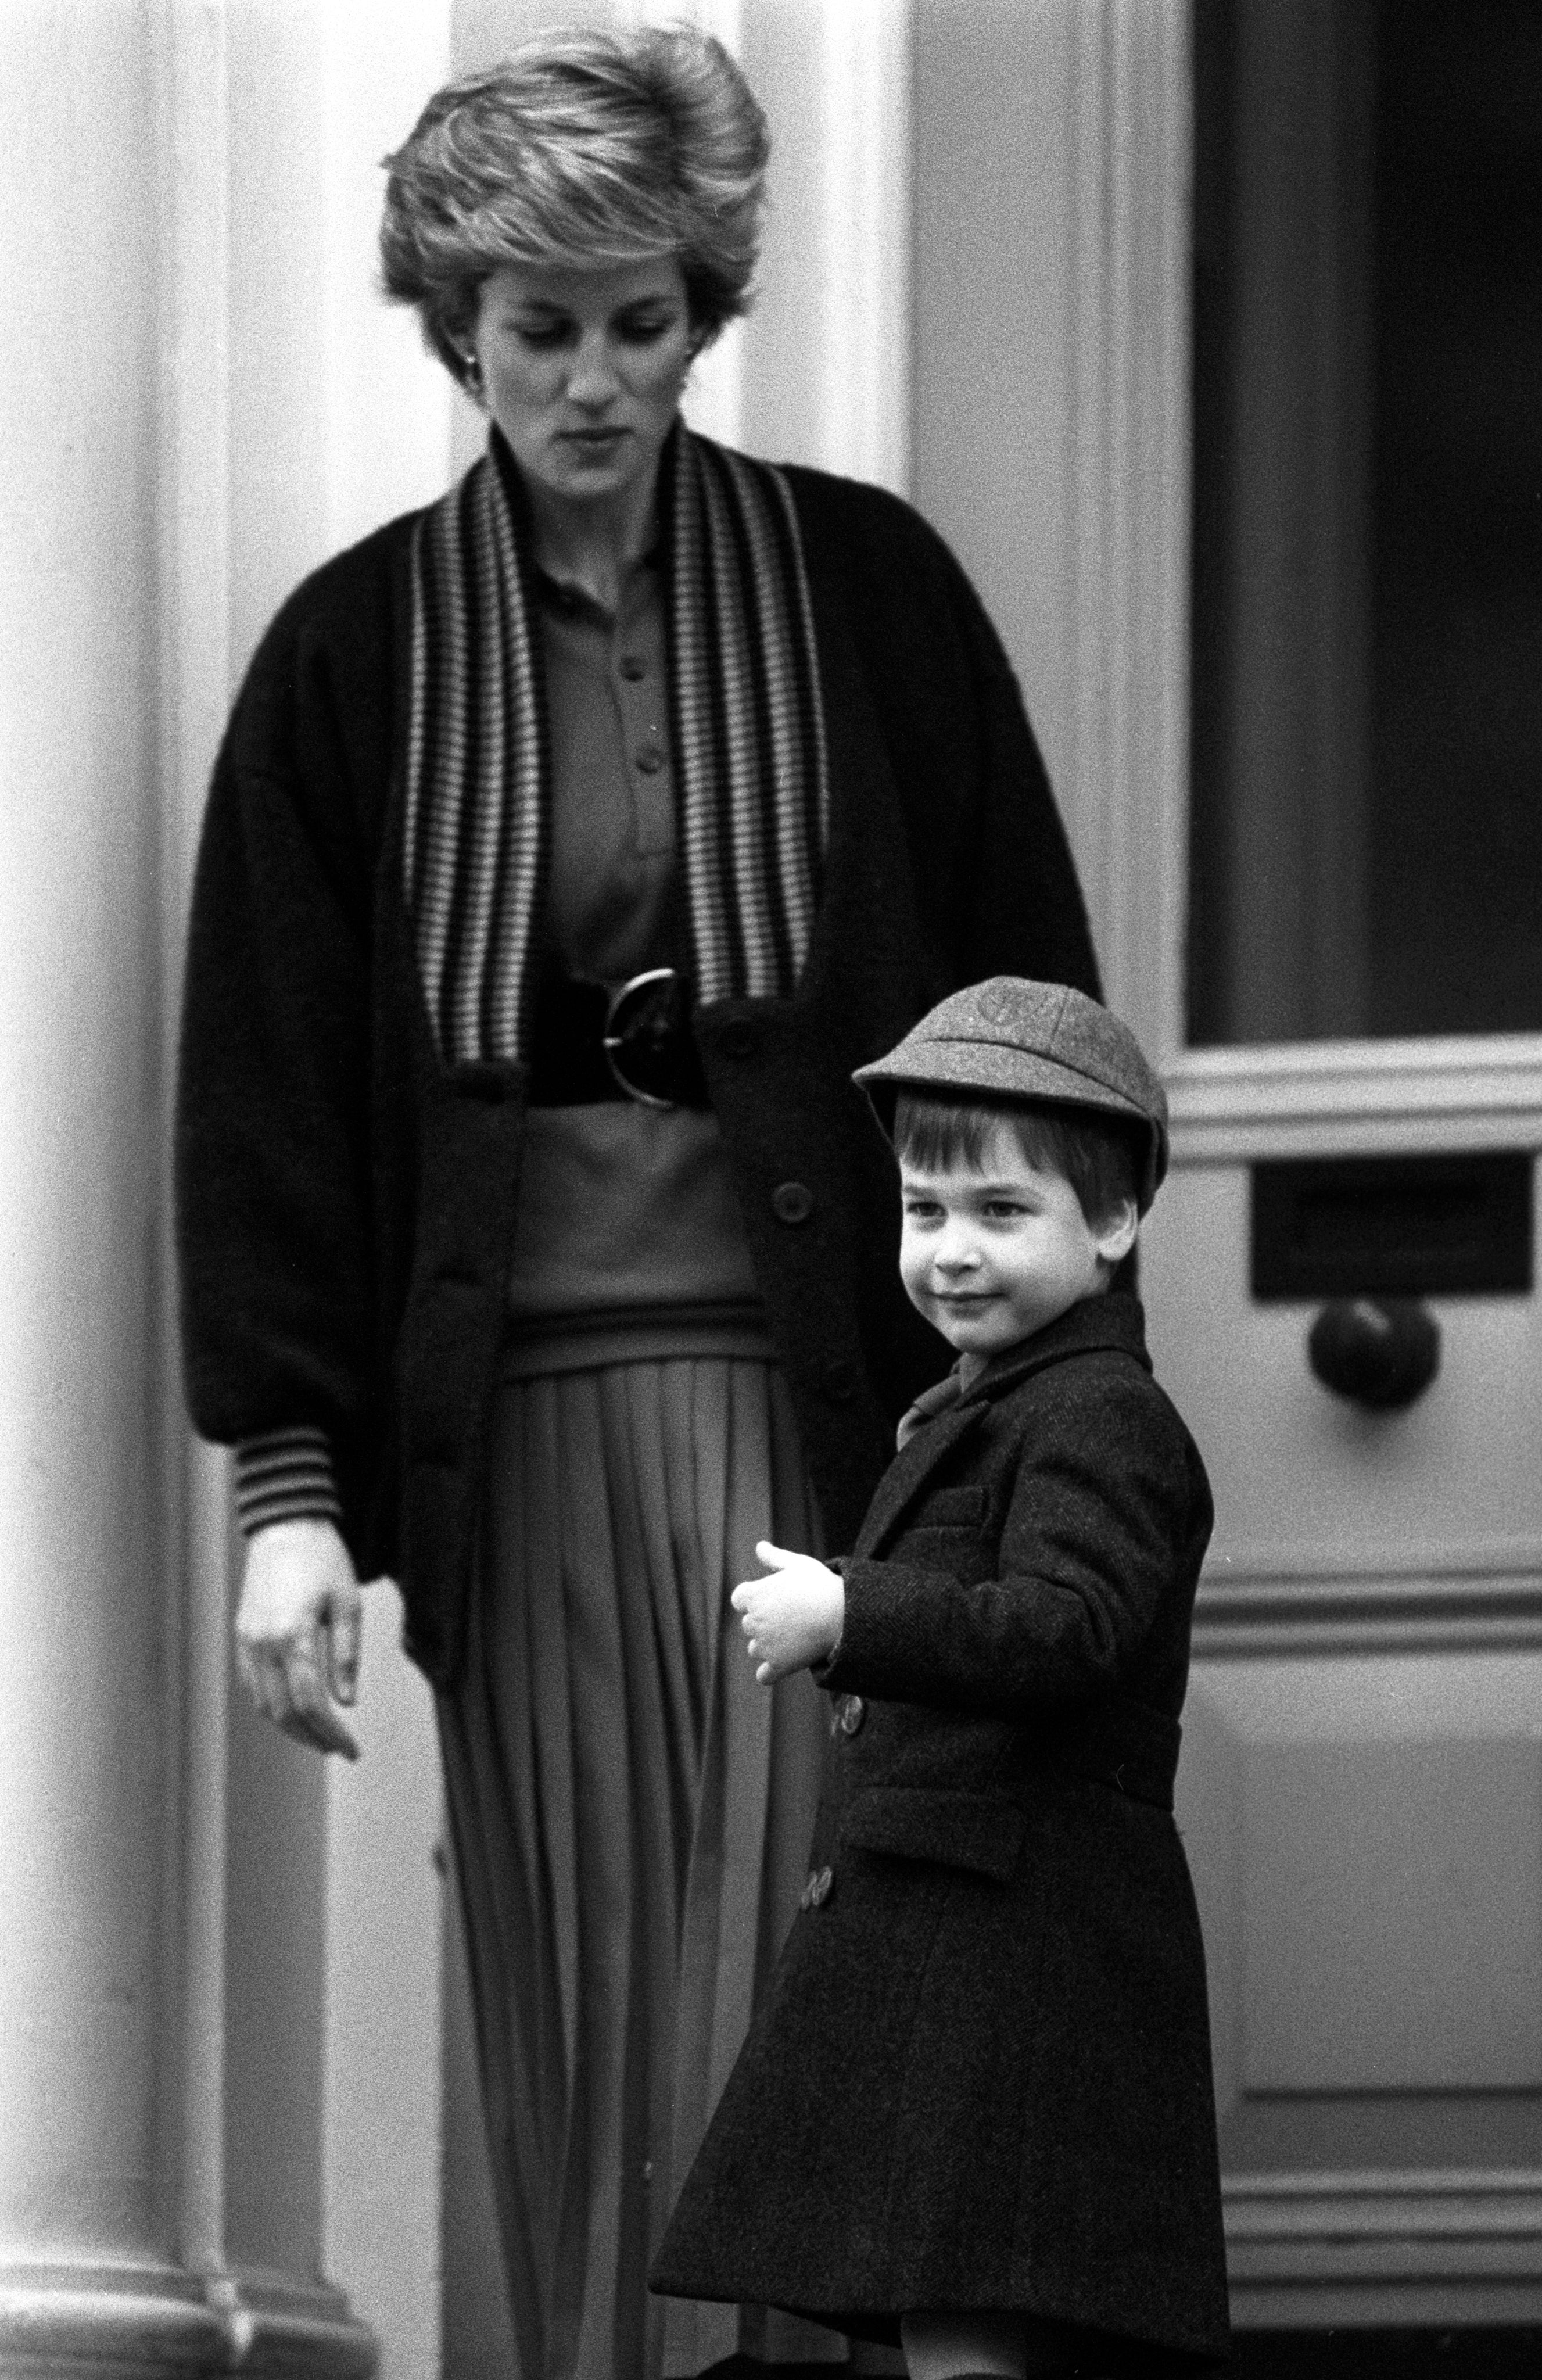 Four-year-old Prince William with his mother, the Princess of Wales, waves at onlookers before his first day at Wetherby School in Notting Hill Gate (PA)